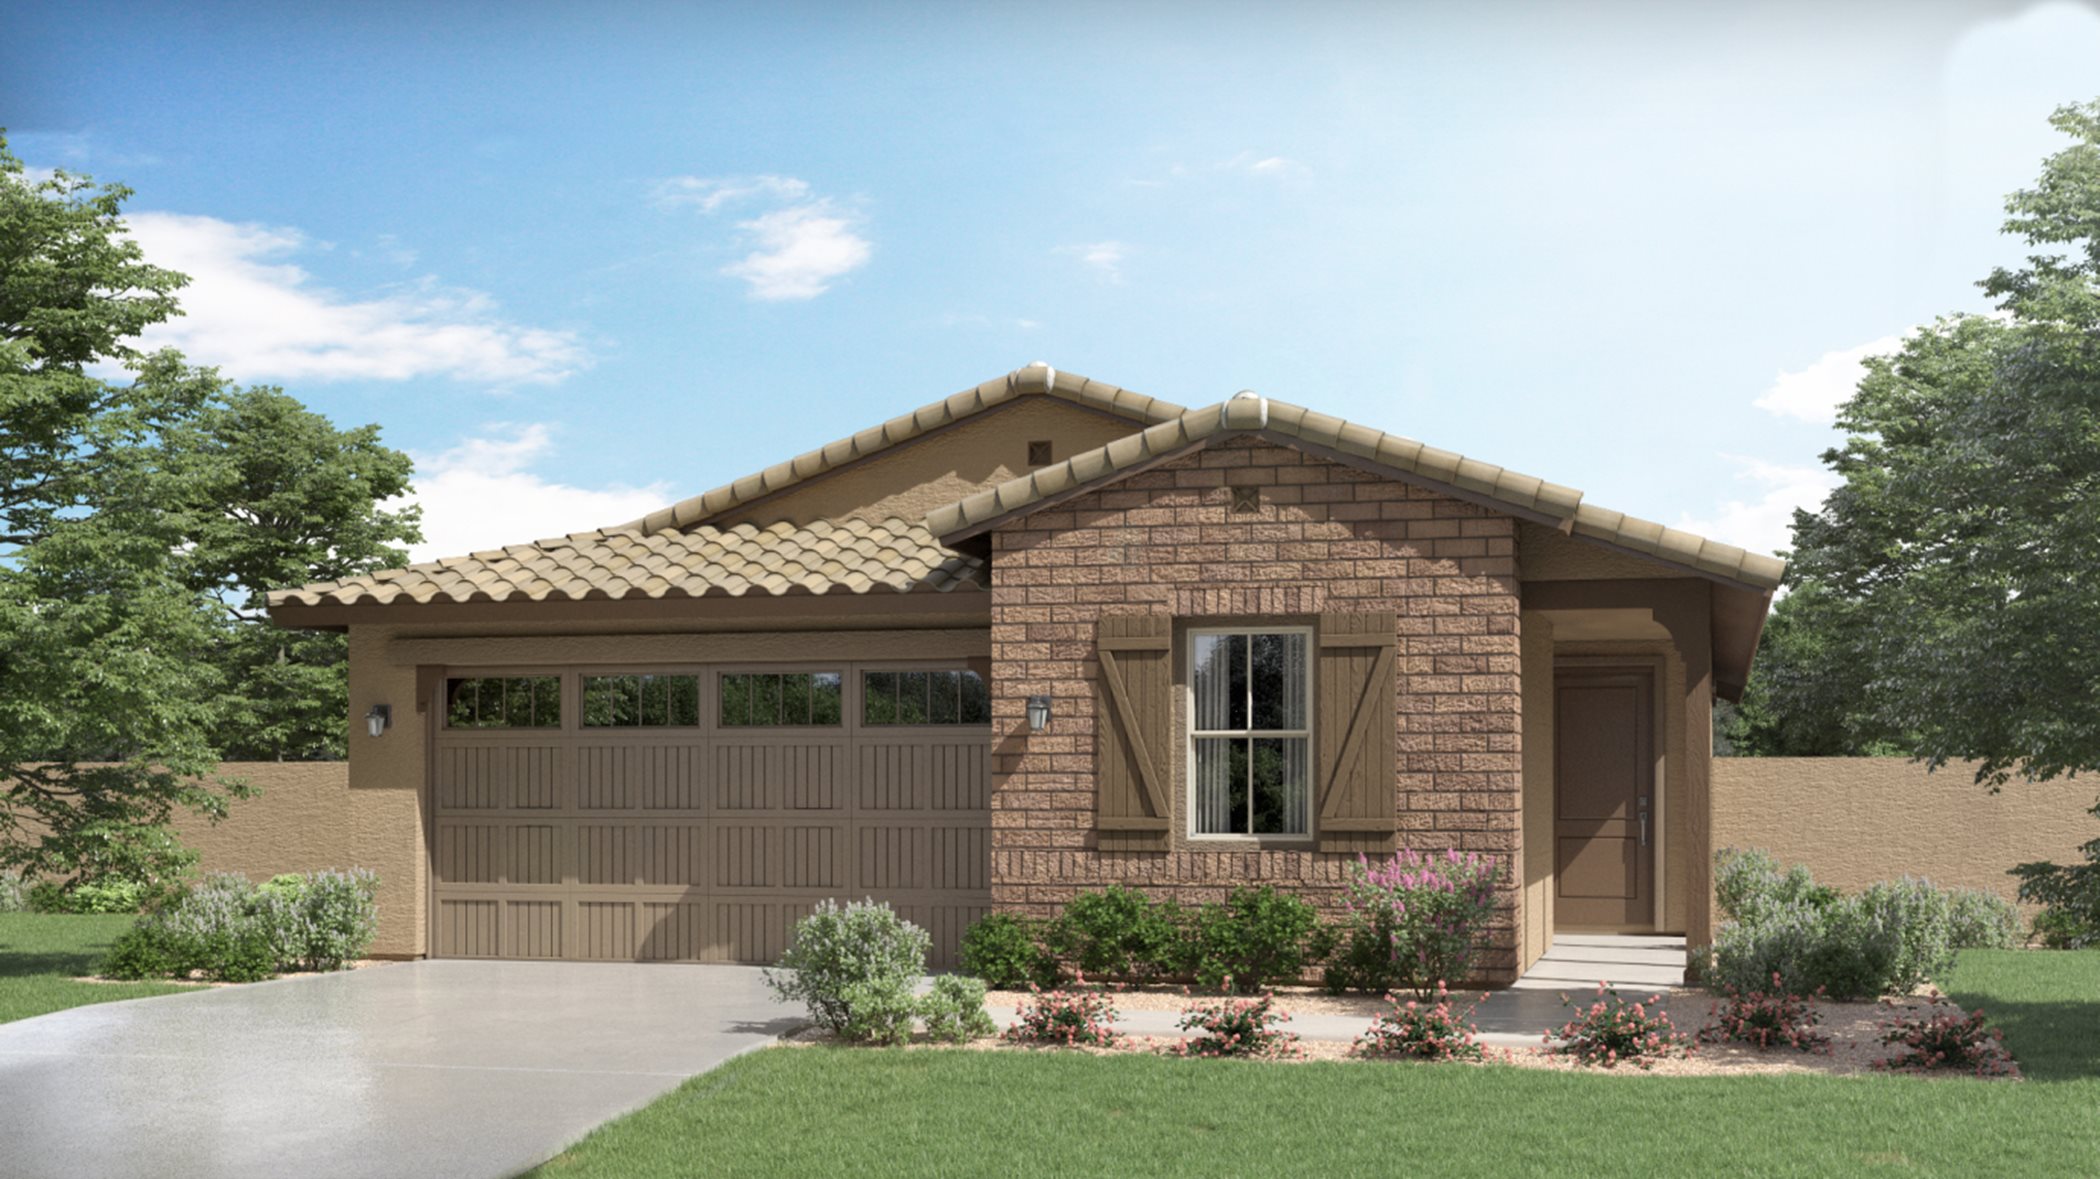 Asher Pointe Discovery - Palo Verde Plan 3519 Exterior H